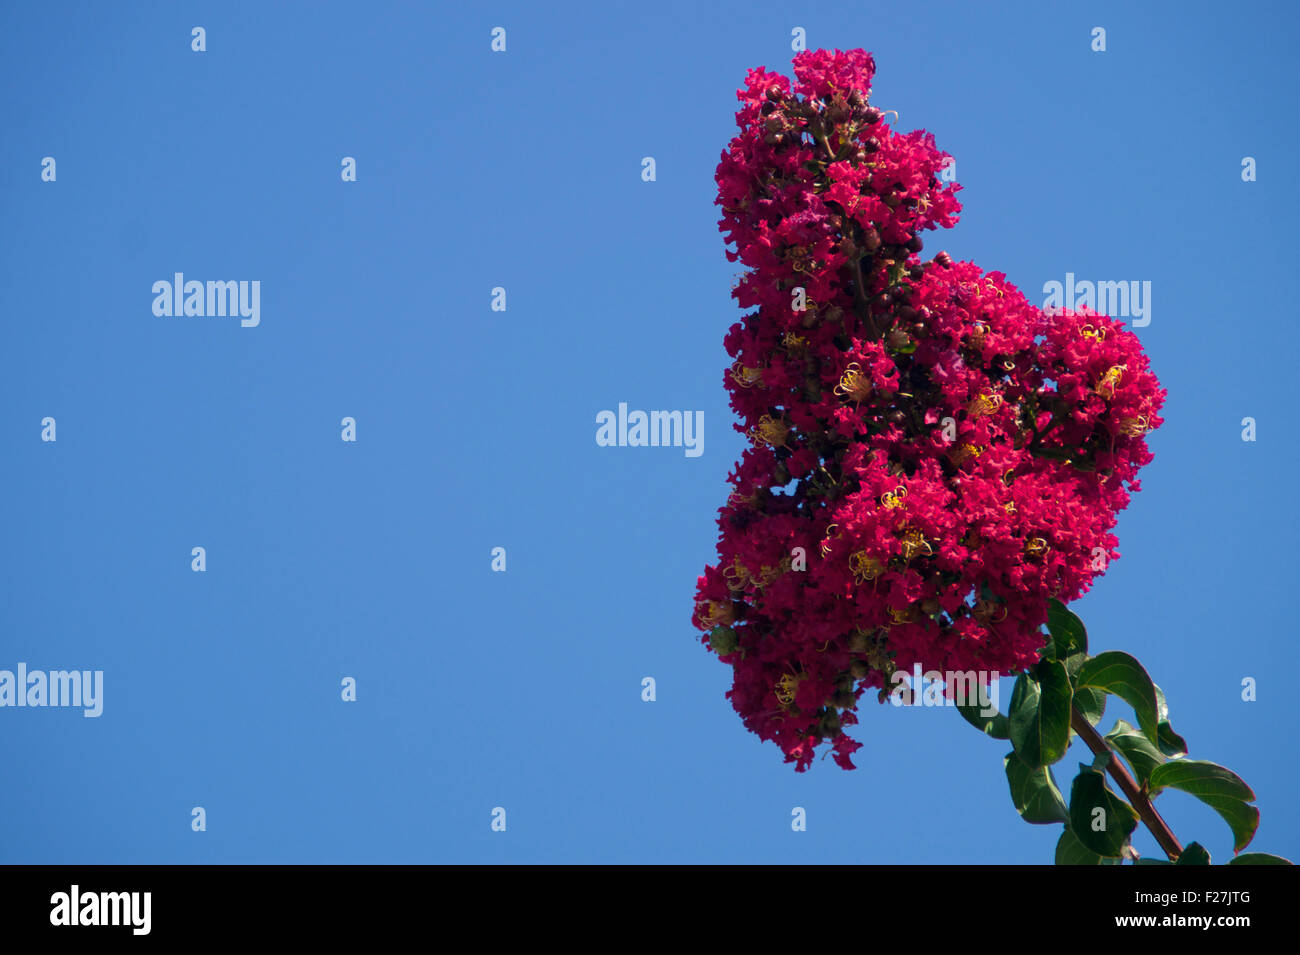 A small group of flowers on a tree Stock Photo